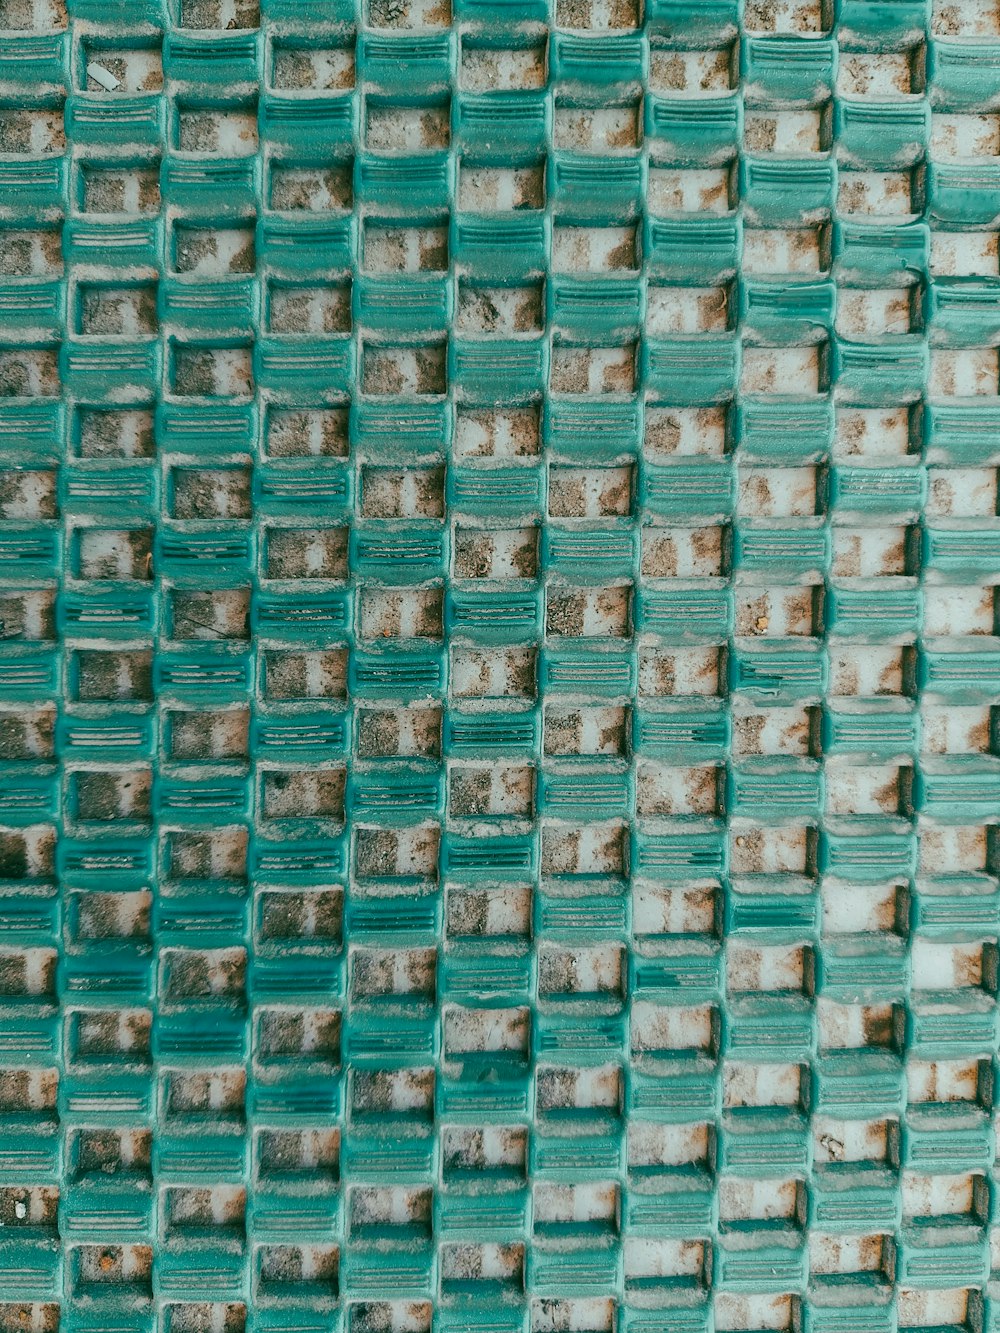 a close up of a wall made of glass blocks